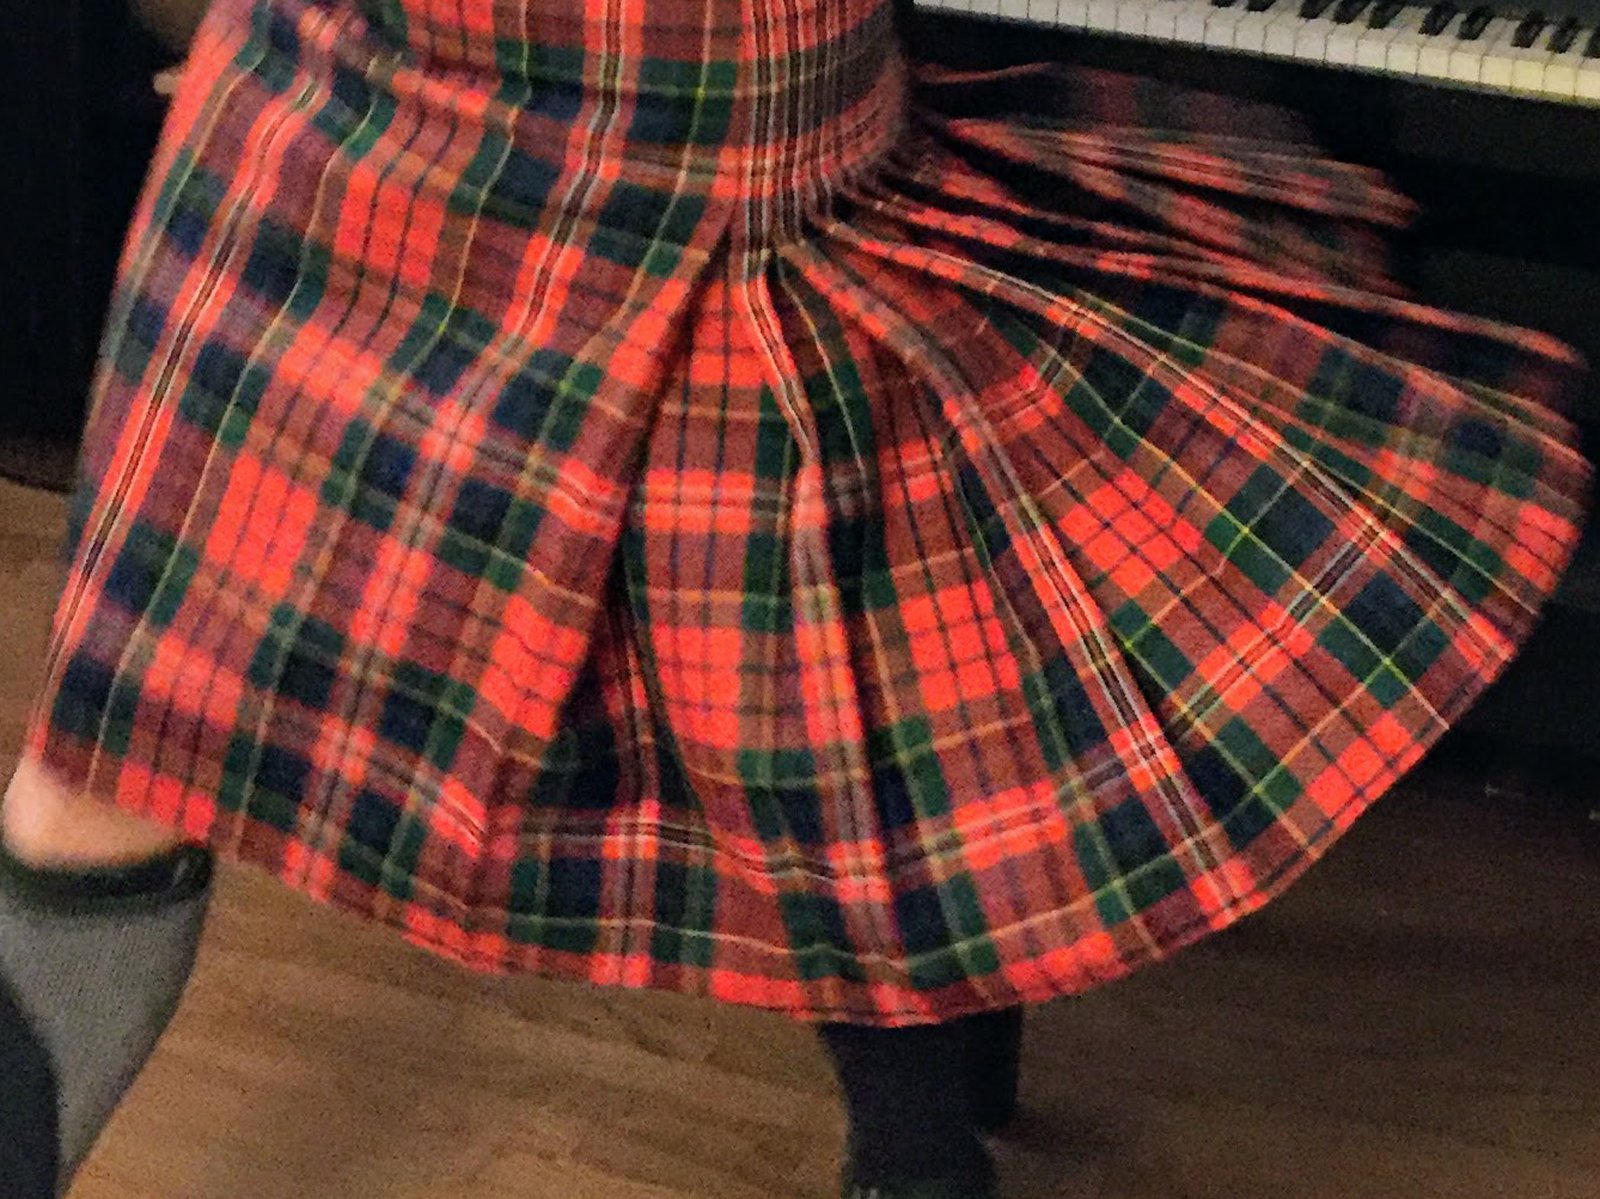   Kilt in Action , 2019. Wool, Cotton, leather and metal buckles. COURTESY OF ROBIN CASSADY-CAIN 